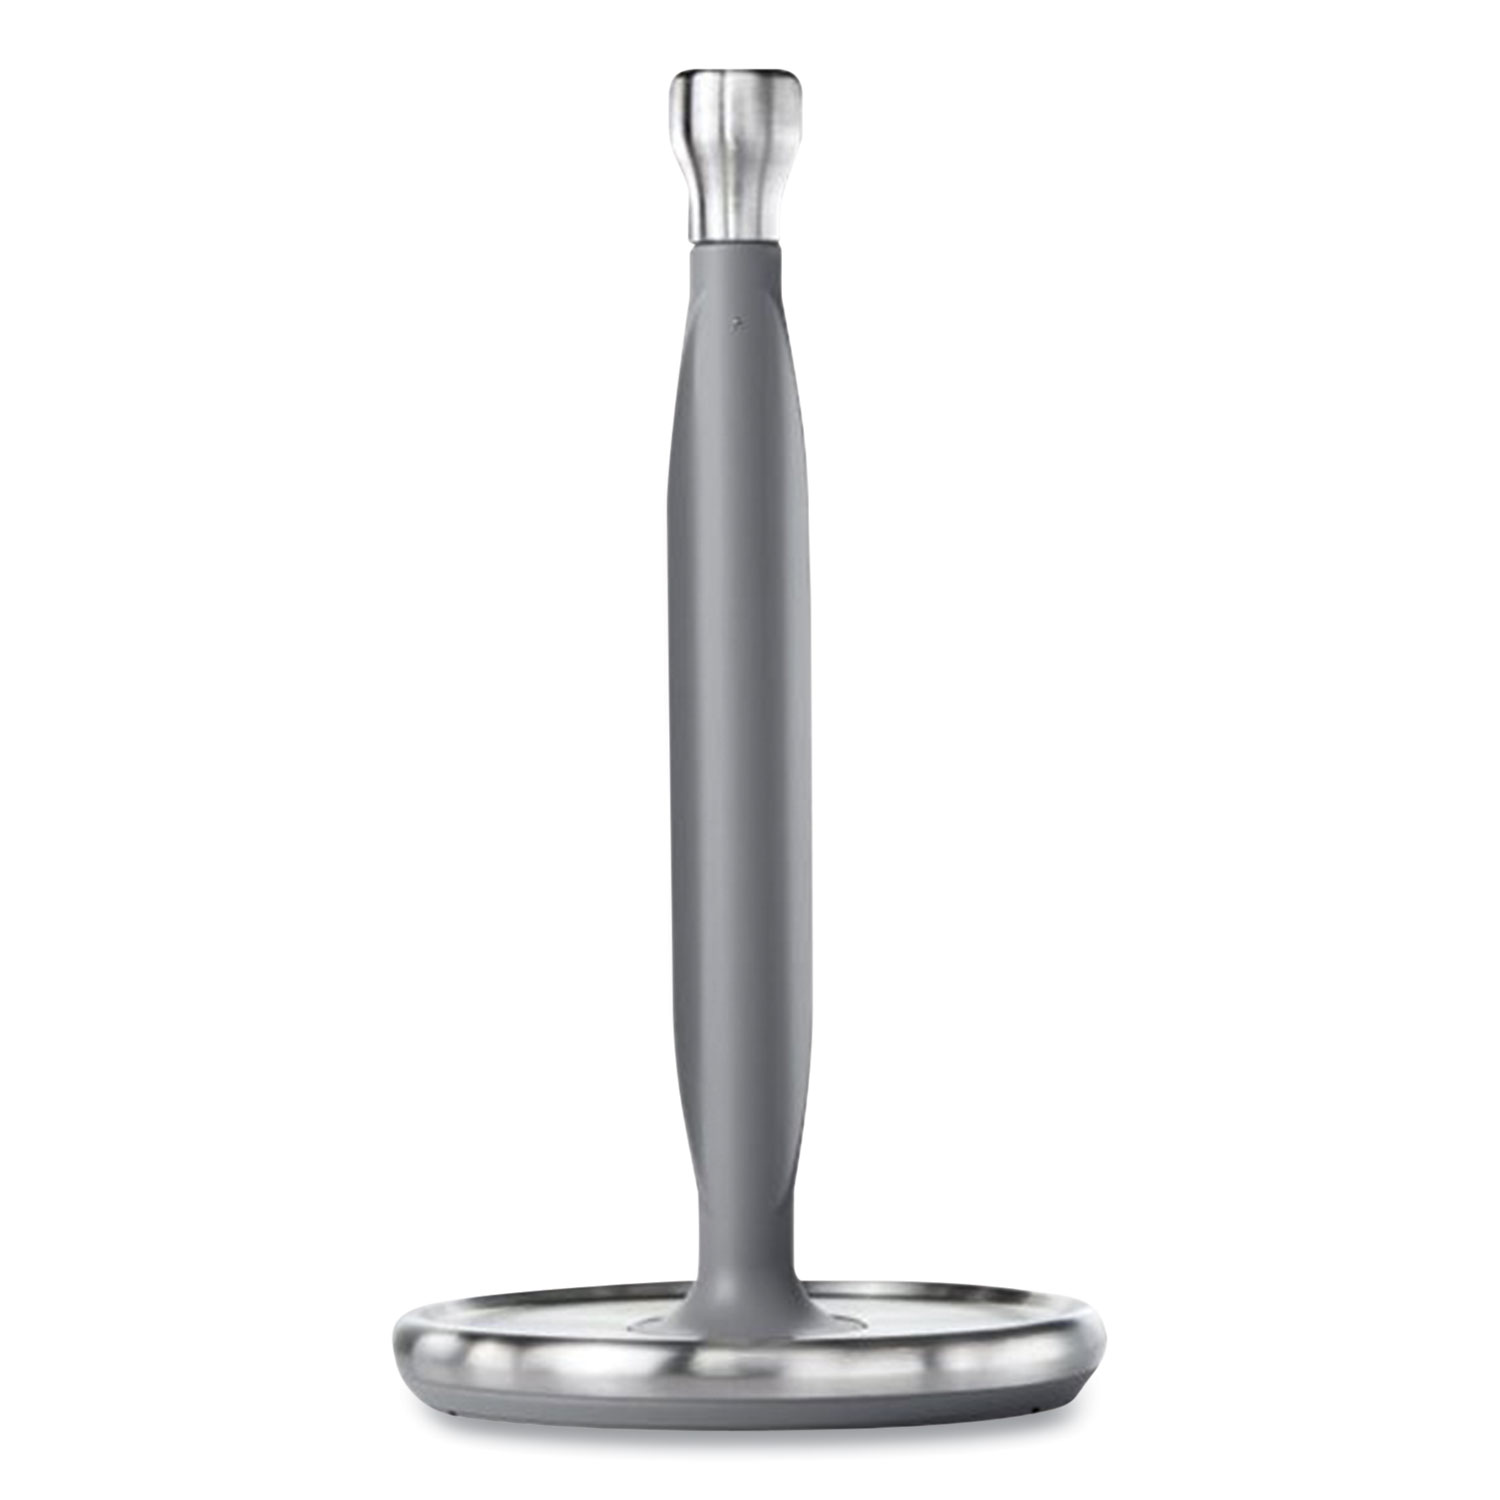 OXO Good Grips Steady Paper Towel Holder, Stainless Steel, 8.1 x 7.8 x 14.5, Gray/Silver